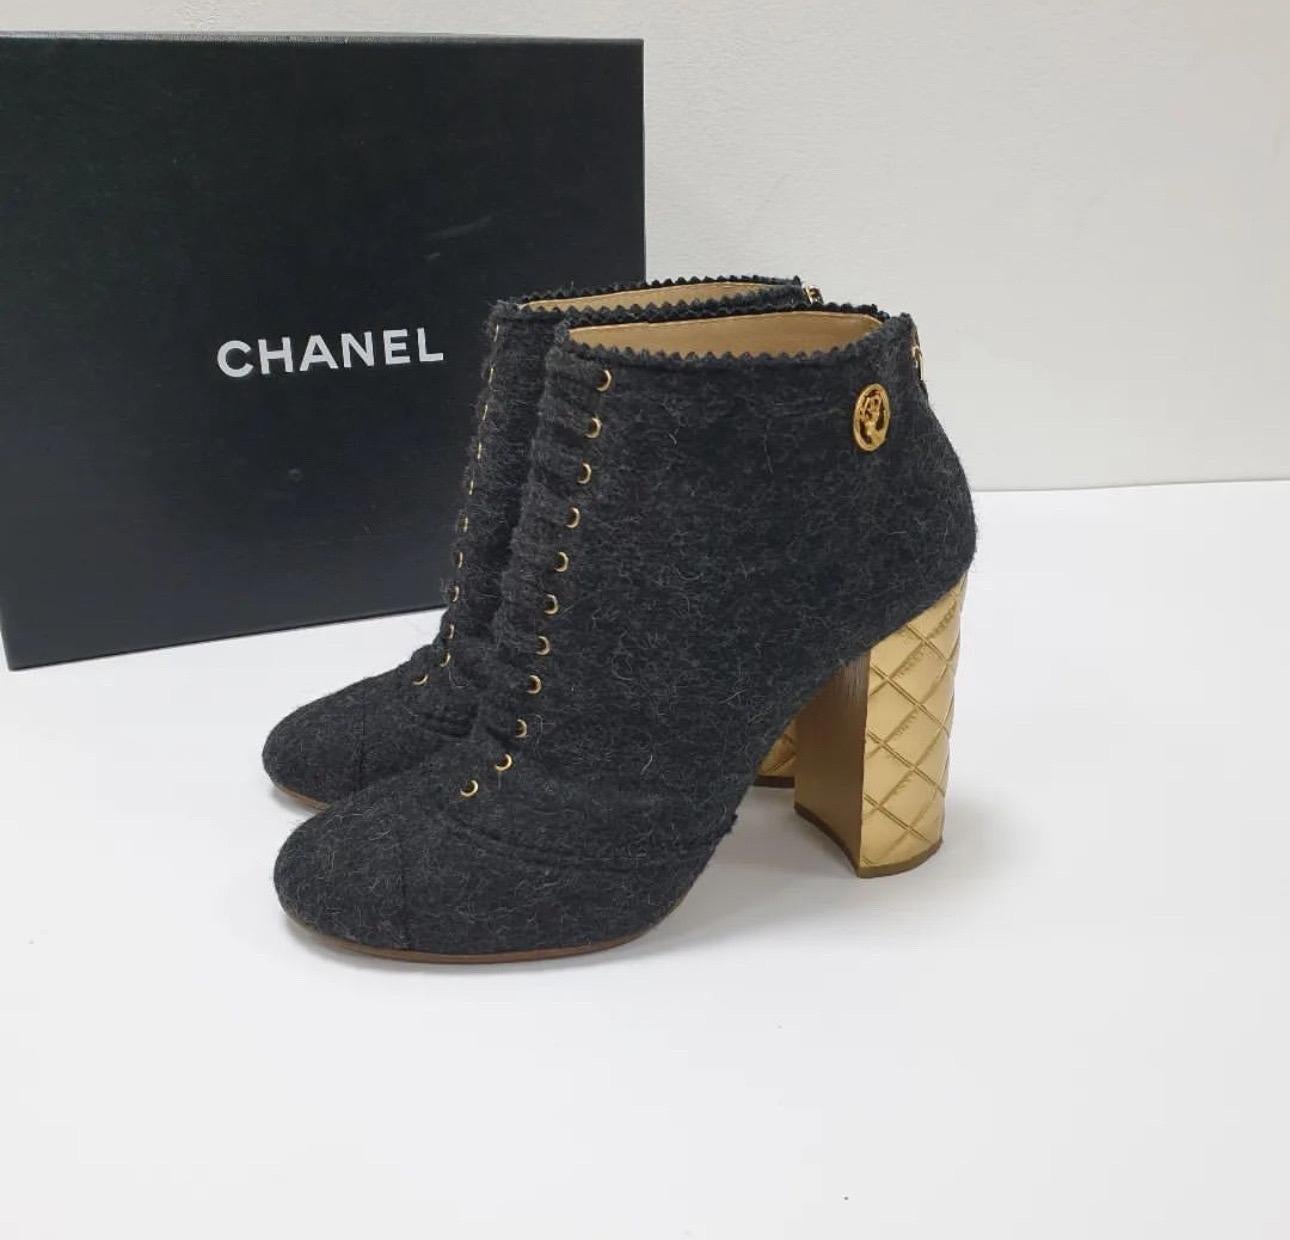 CHANEL Paris-Salzburg Gray Wool Gold Heel Ankle Boot

Beautiful condition Chanel Paris Salzburg Rare Wool Ankle Boot

Size 39.5

Gray Felted Wool Upper with a zigzag detail edging

Round Gold toned deer insignia w/a CC emblem near the top outside of